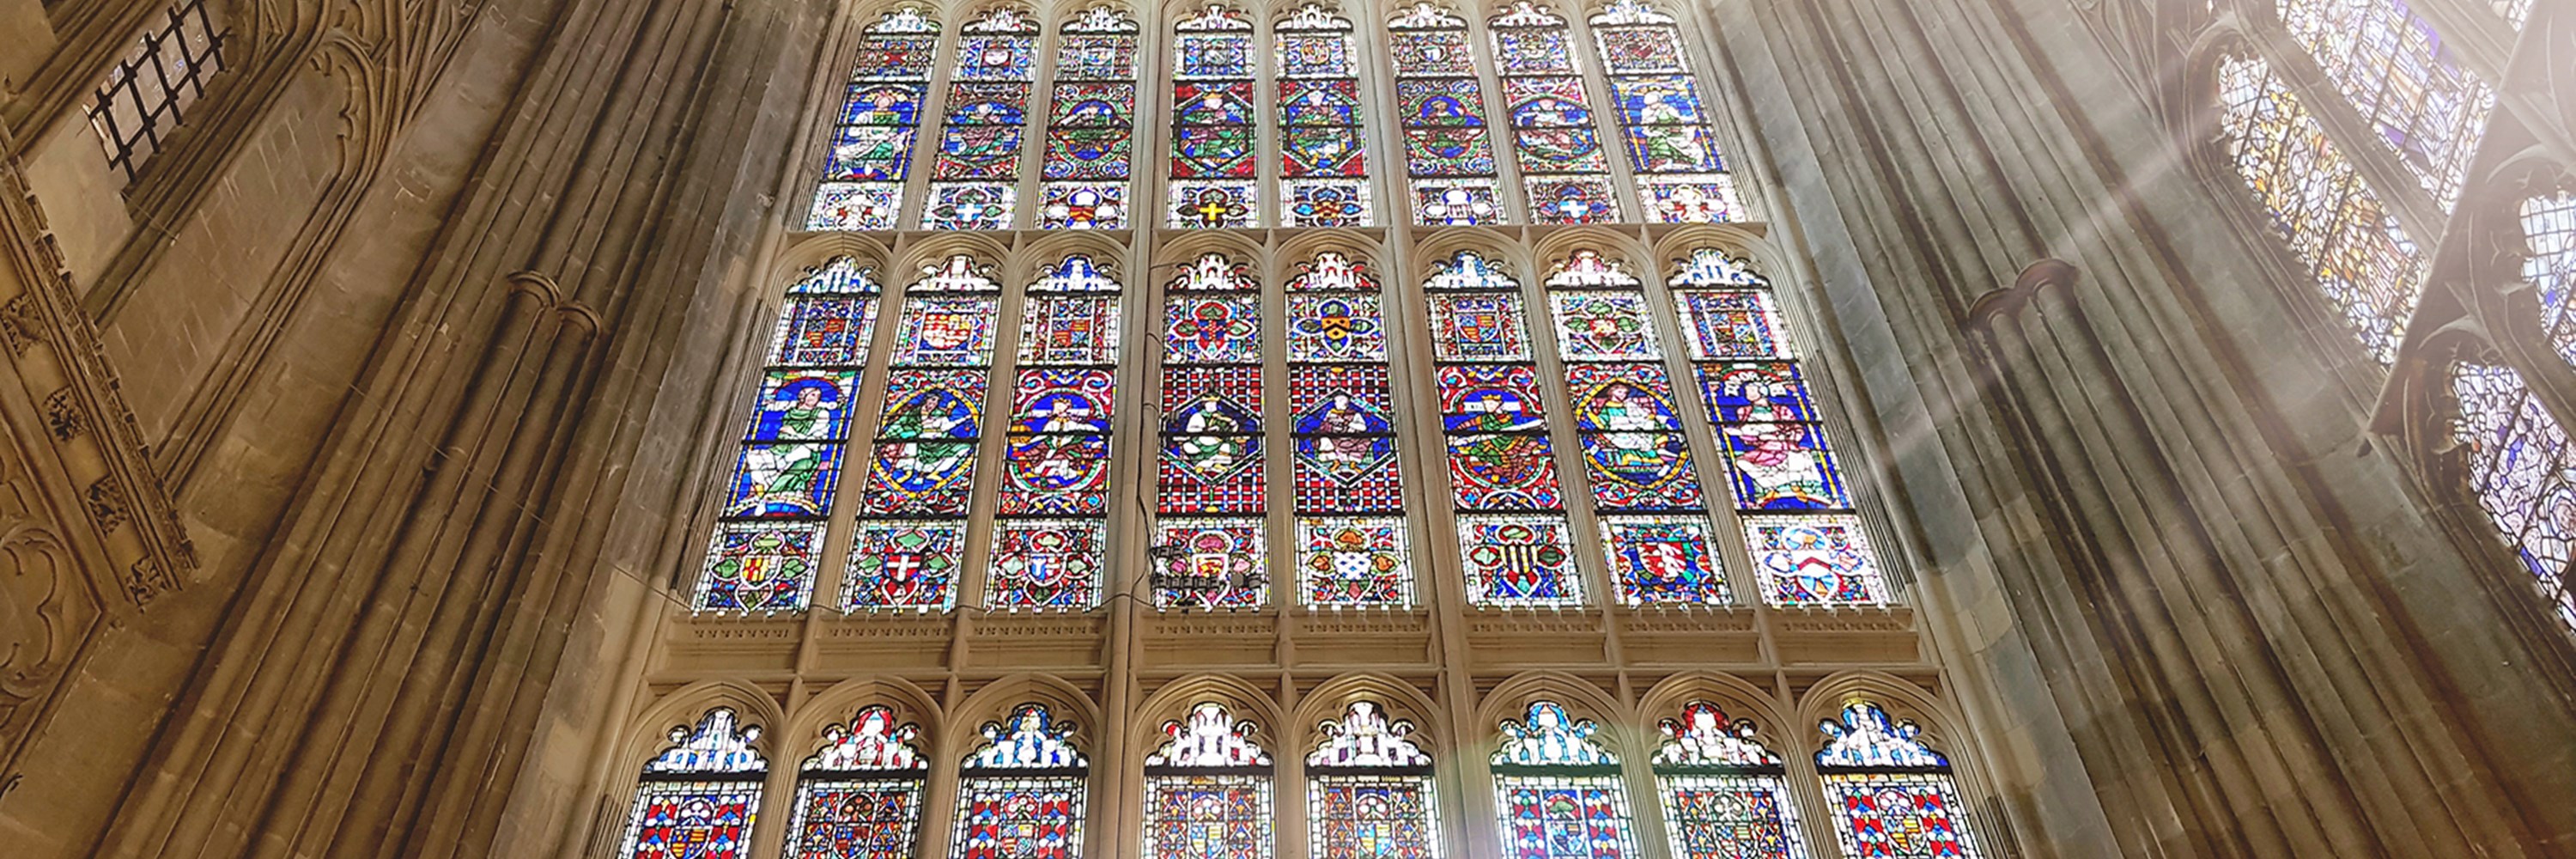 Copy Of A Great South Window After A Renovation Project 2009 2016